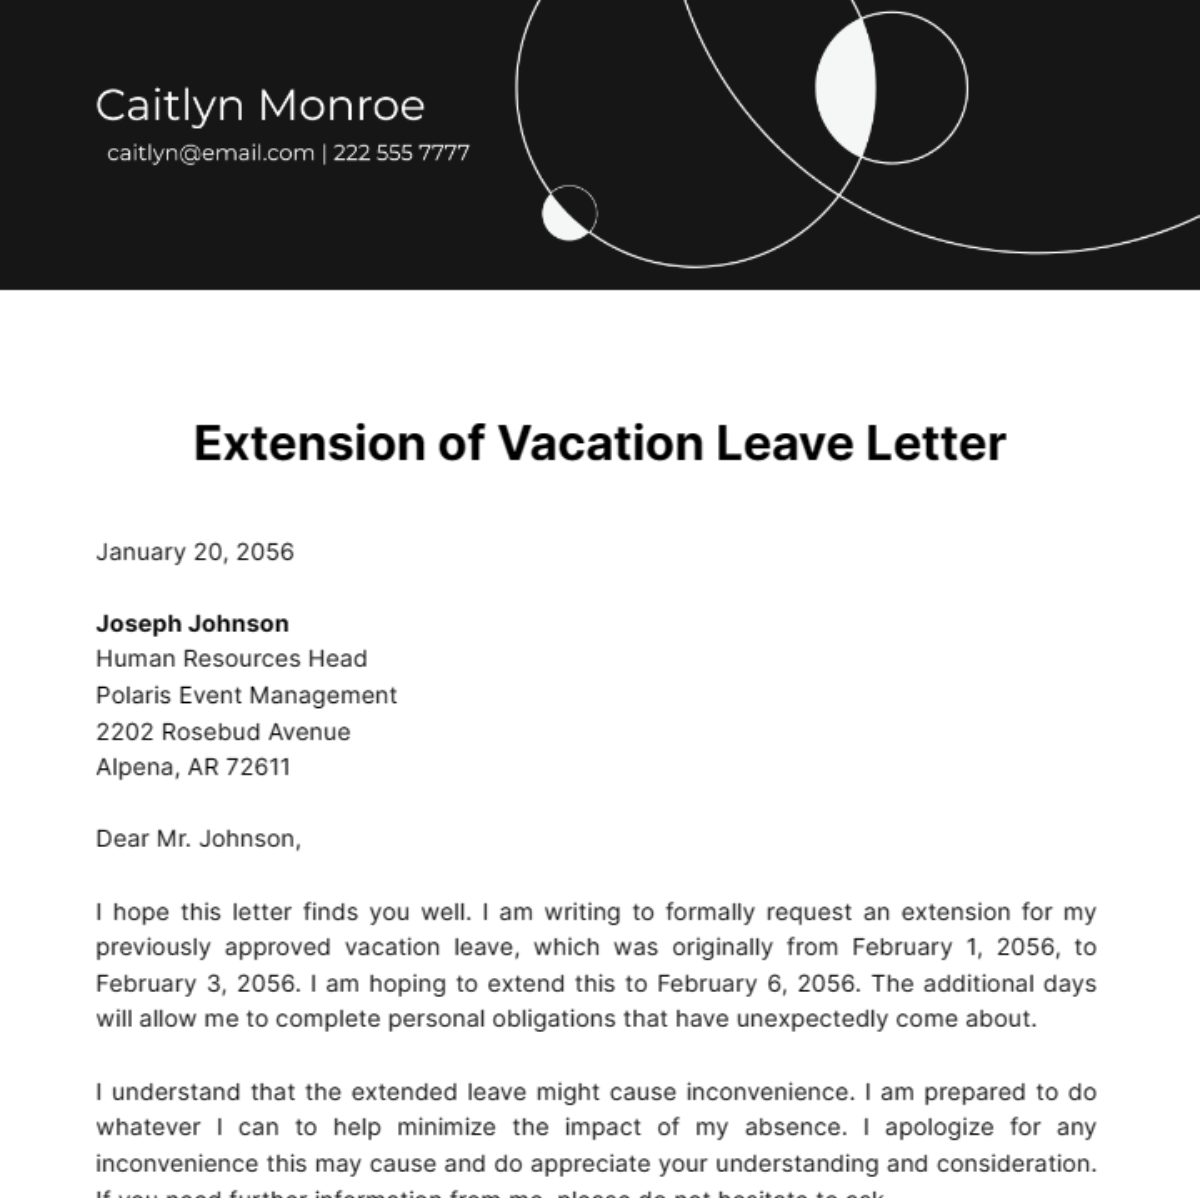 Extension of Vacation Leave Letter Template